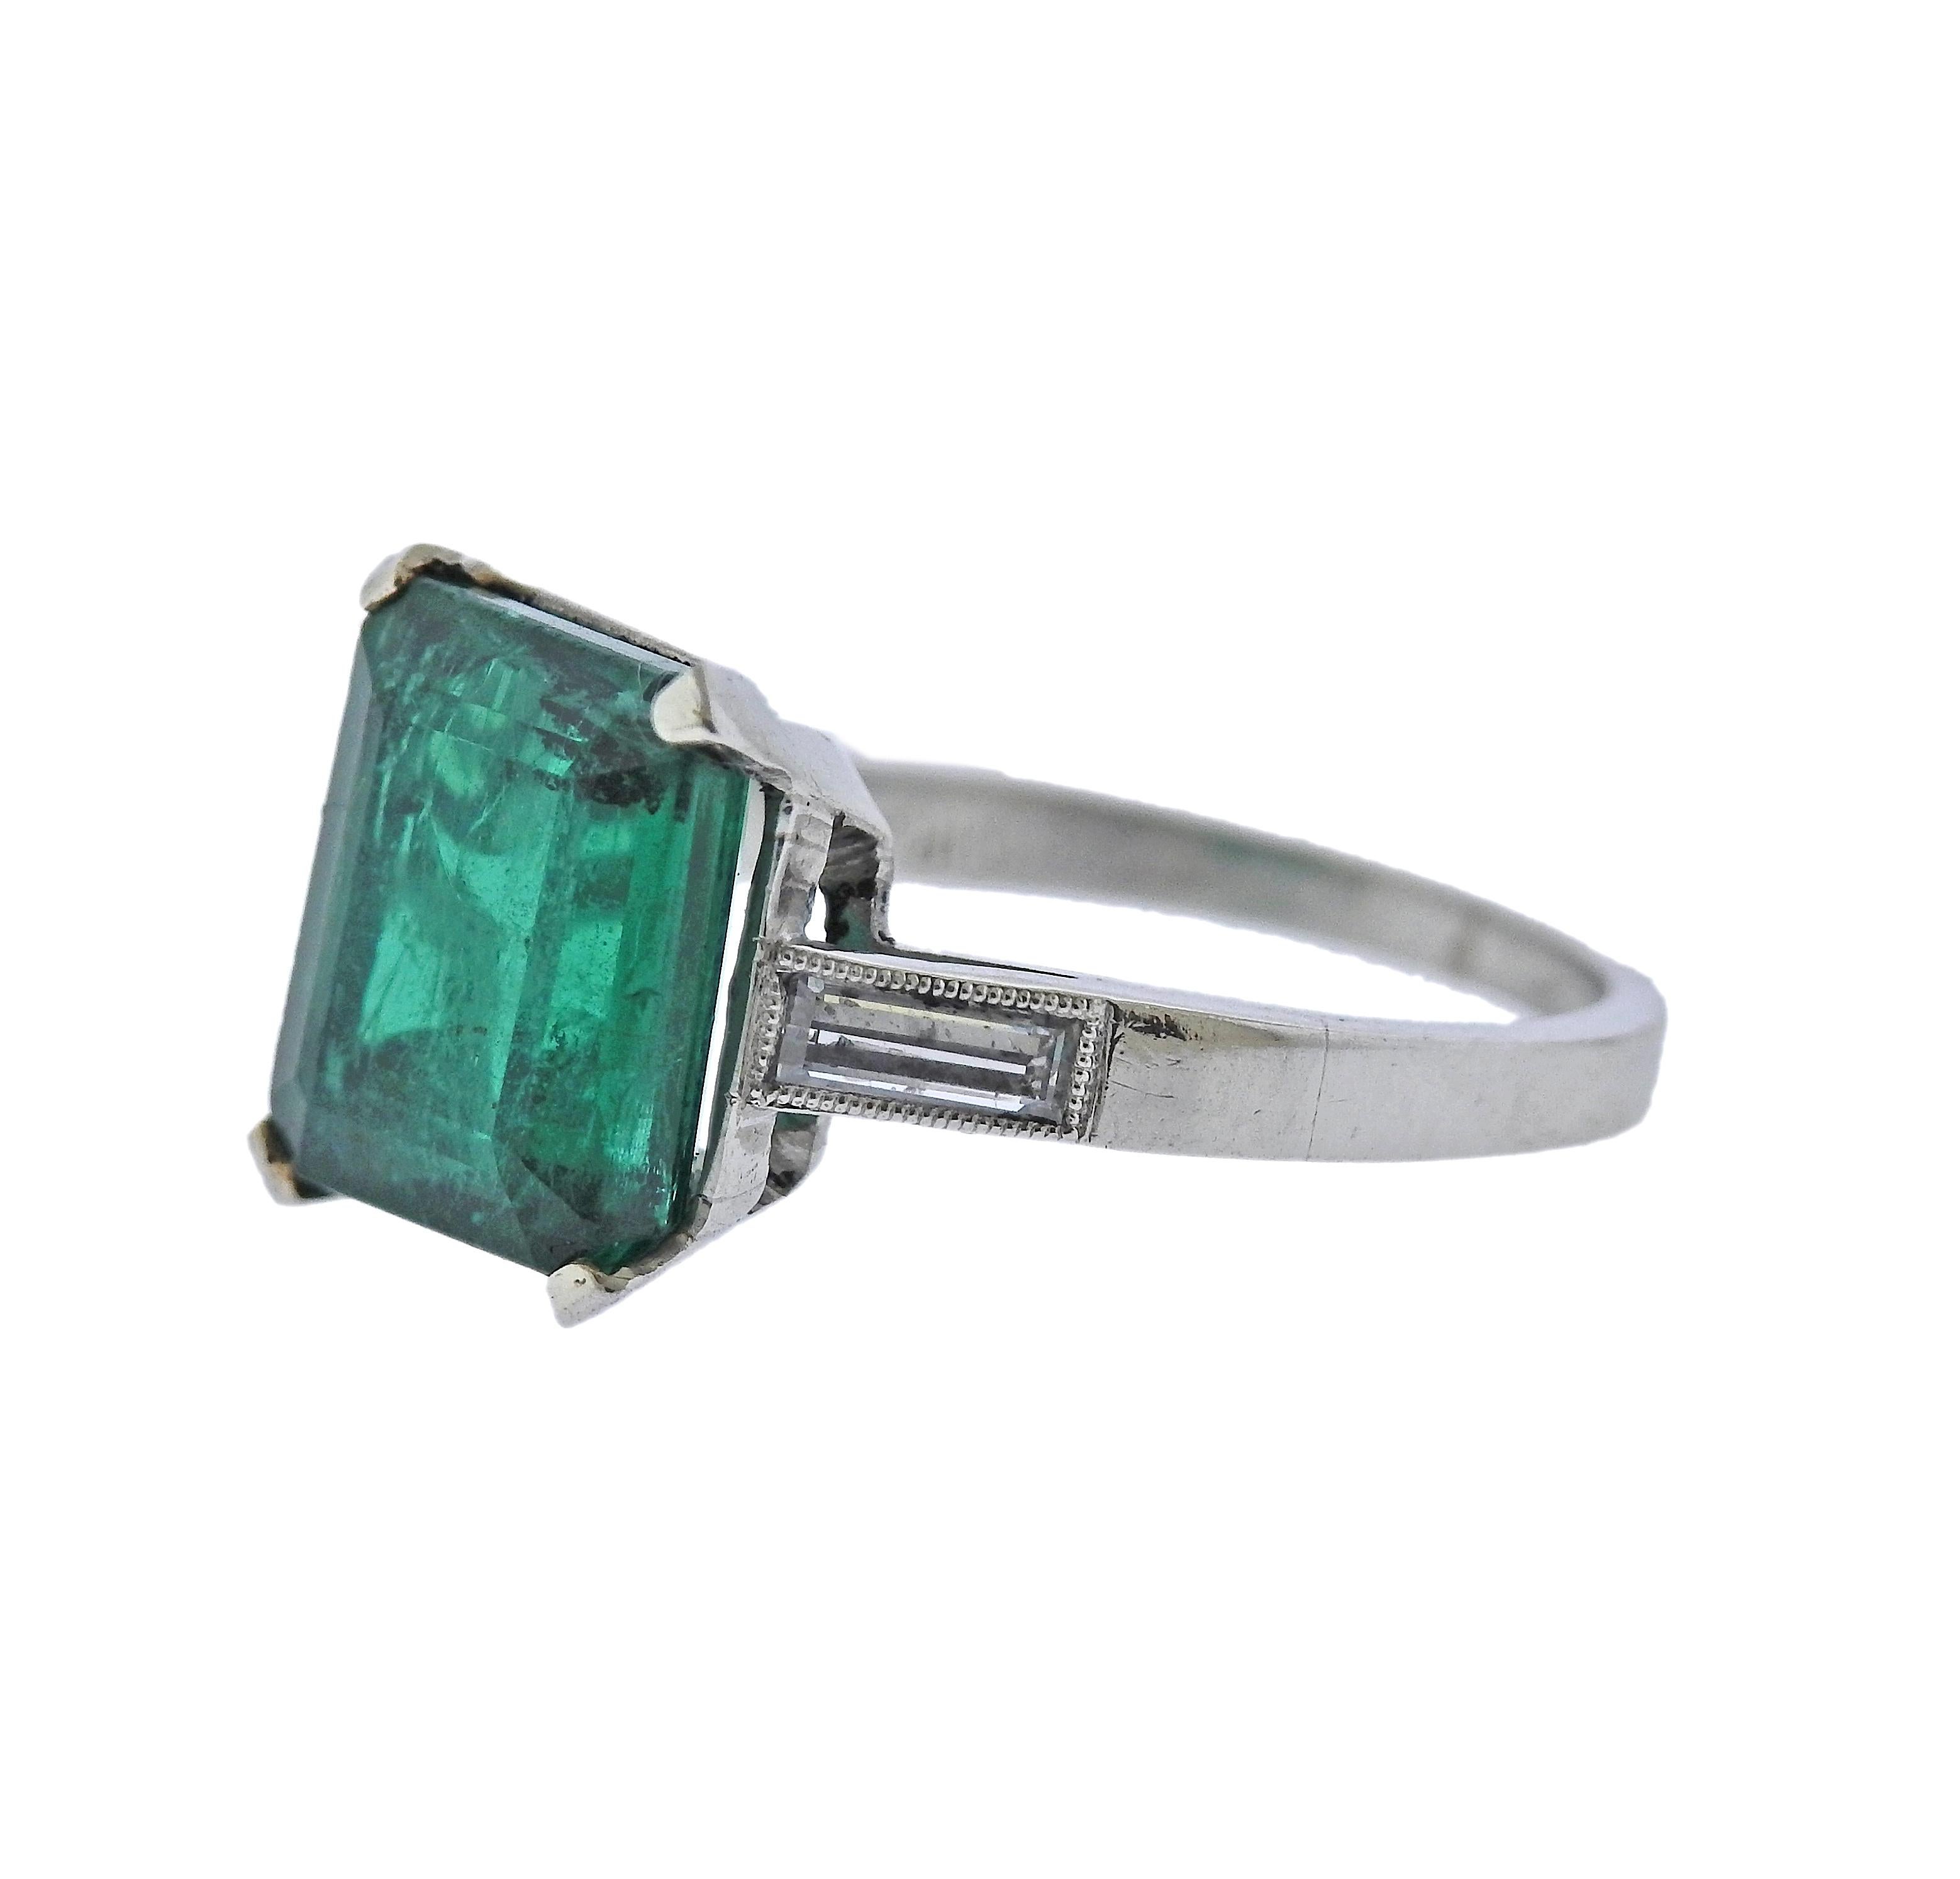 Platinum ring, with center approx. 2.53ct emerald ( stone measures 10 x 8.5 x 4.3mm), with two side tapered baguette diamonds. Ring size - 5.25. Marked Plat. Weight - 4.4 grams. 